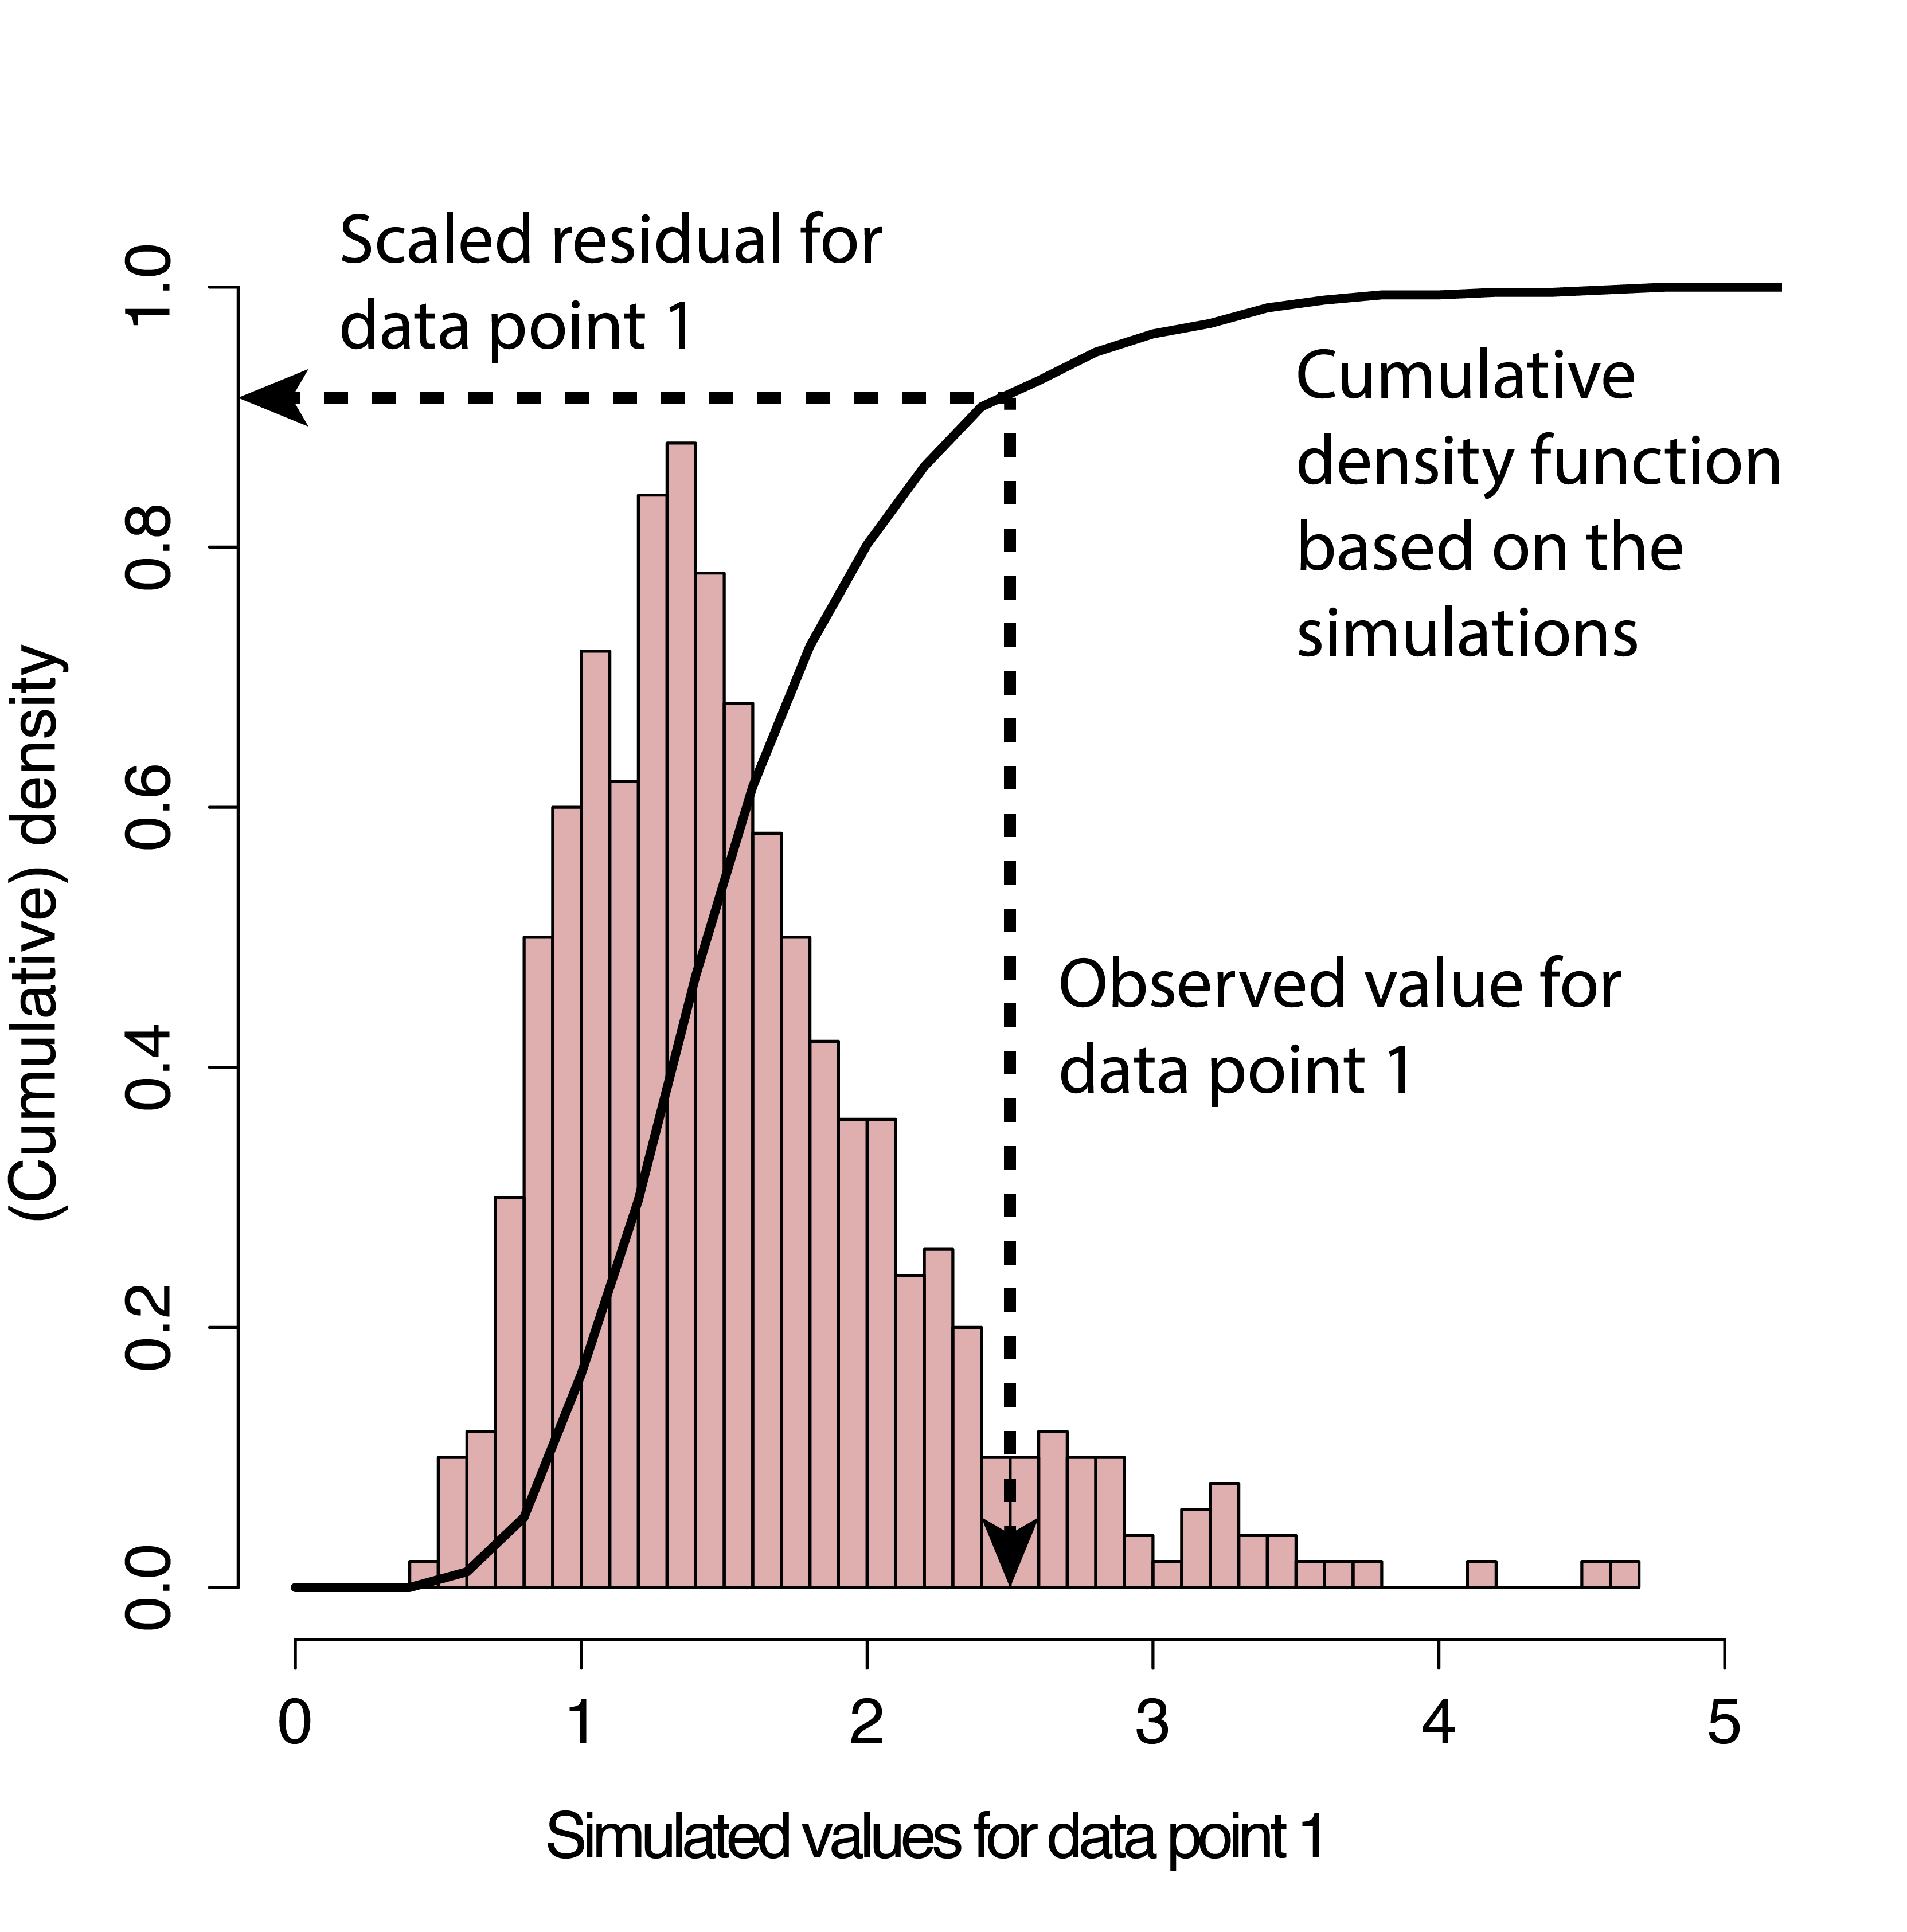 Pink histogram showing simulated values for data point1 on the x-axis and cumulative density on the y